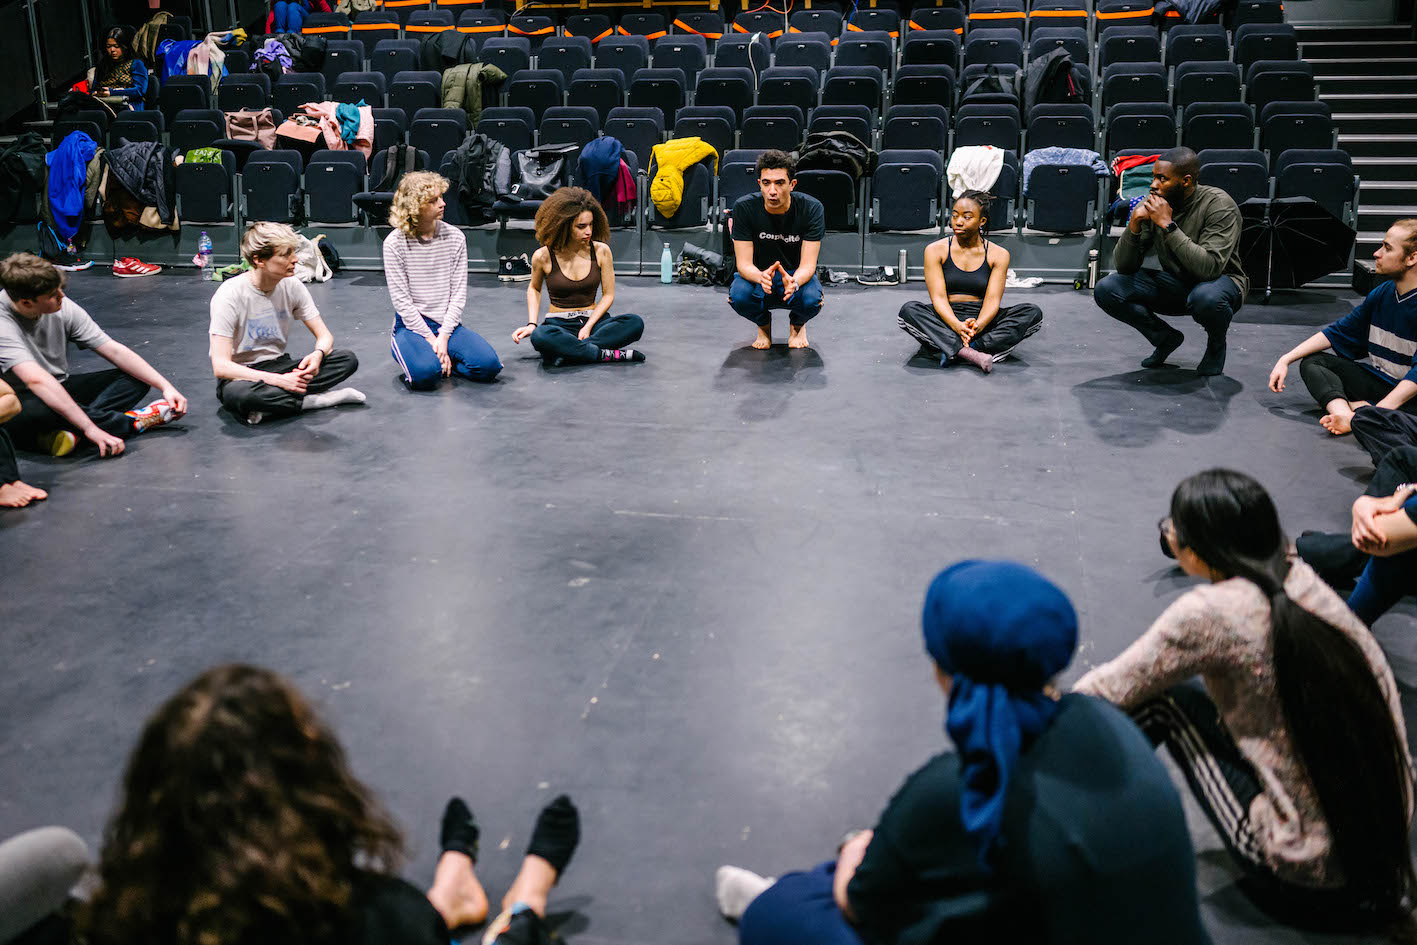 The participants sit in a circle, while their facilities crouch, speaking to them.